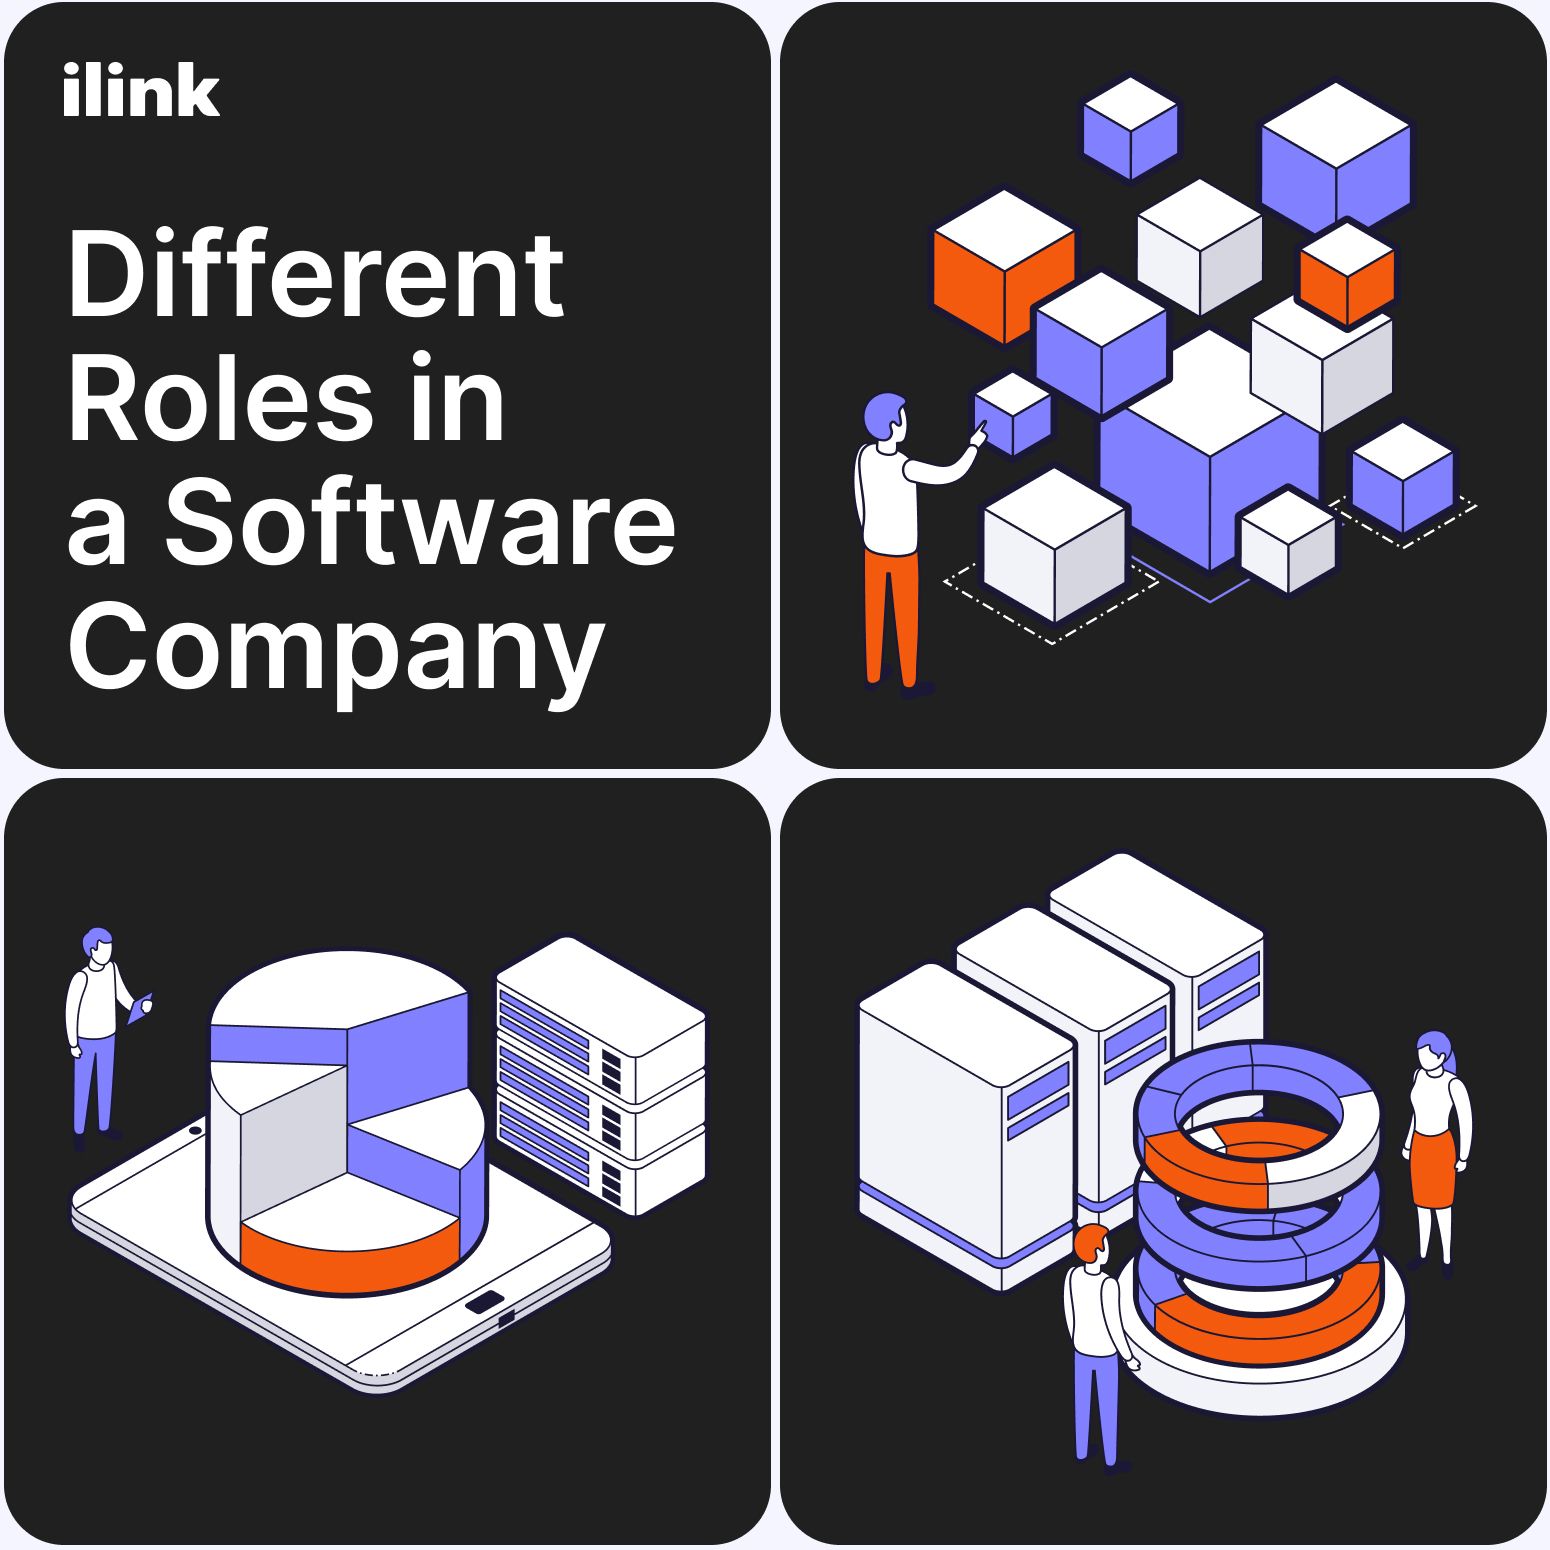 Different Roles in a Software Company | ilink blog